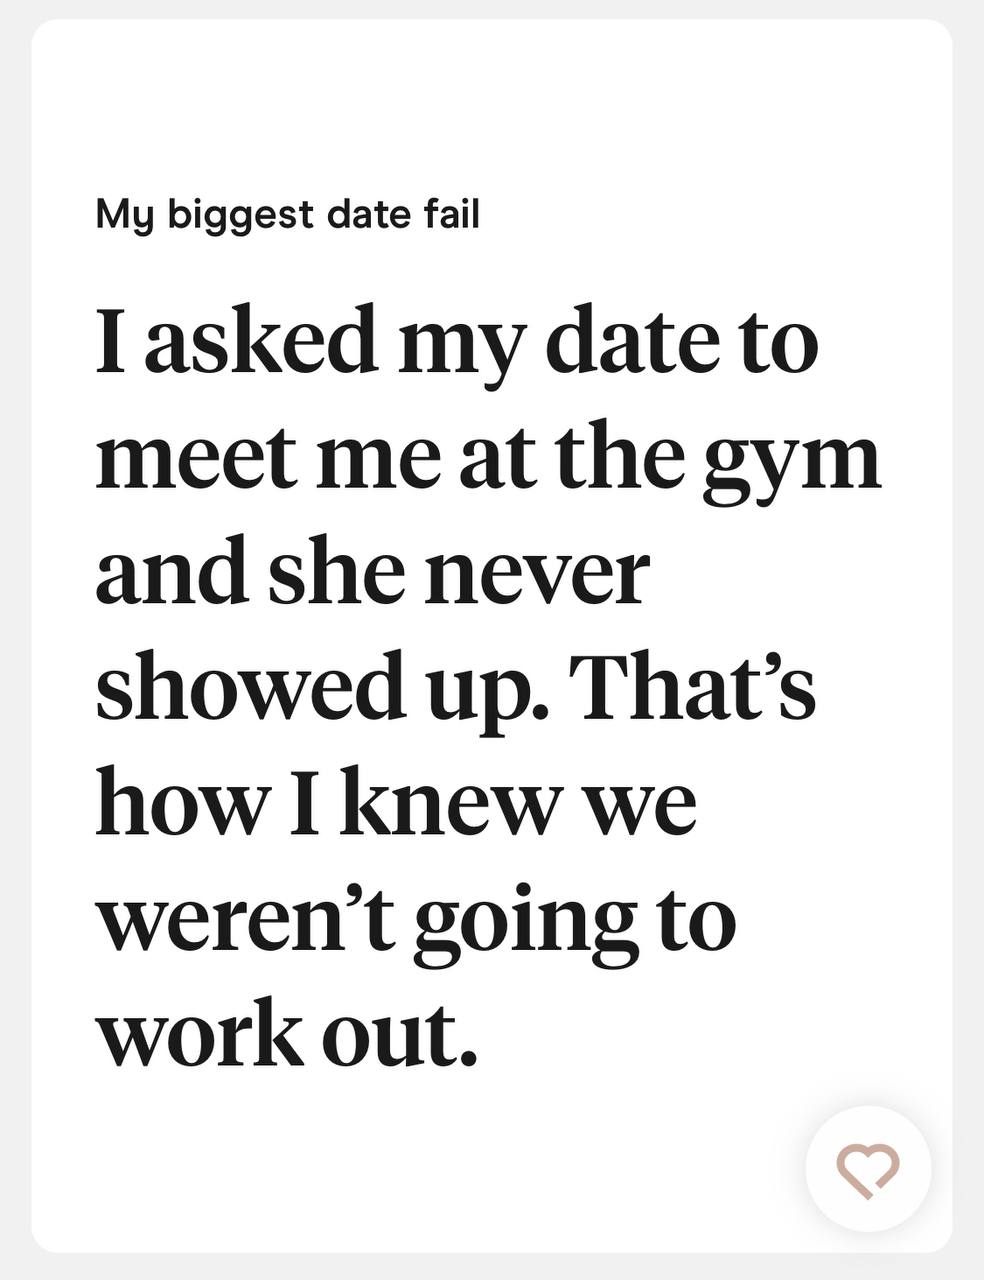 My biggest date fail: I asked my date to meet me at the gym and she never showed up. That&rsquo;s how I knew we weren&rsquo;t going to work out.